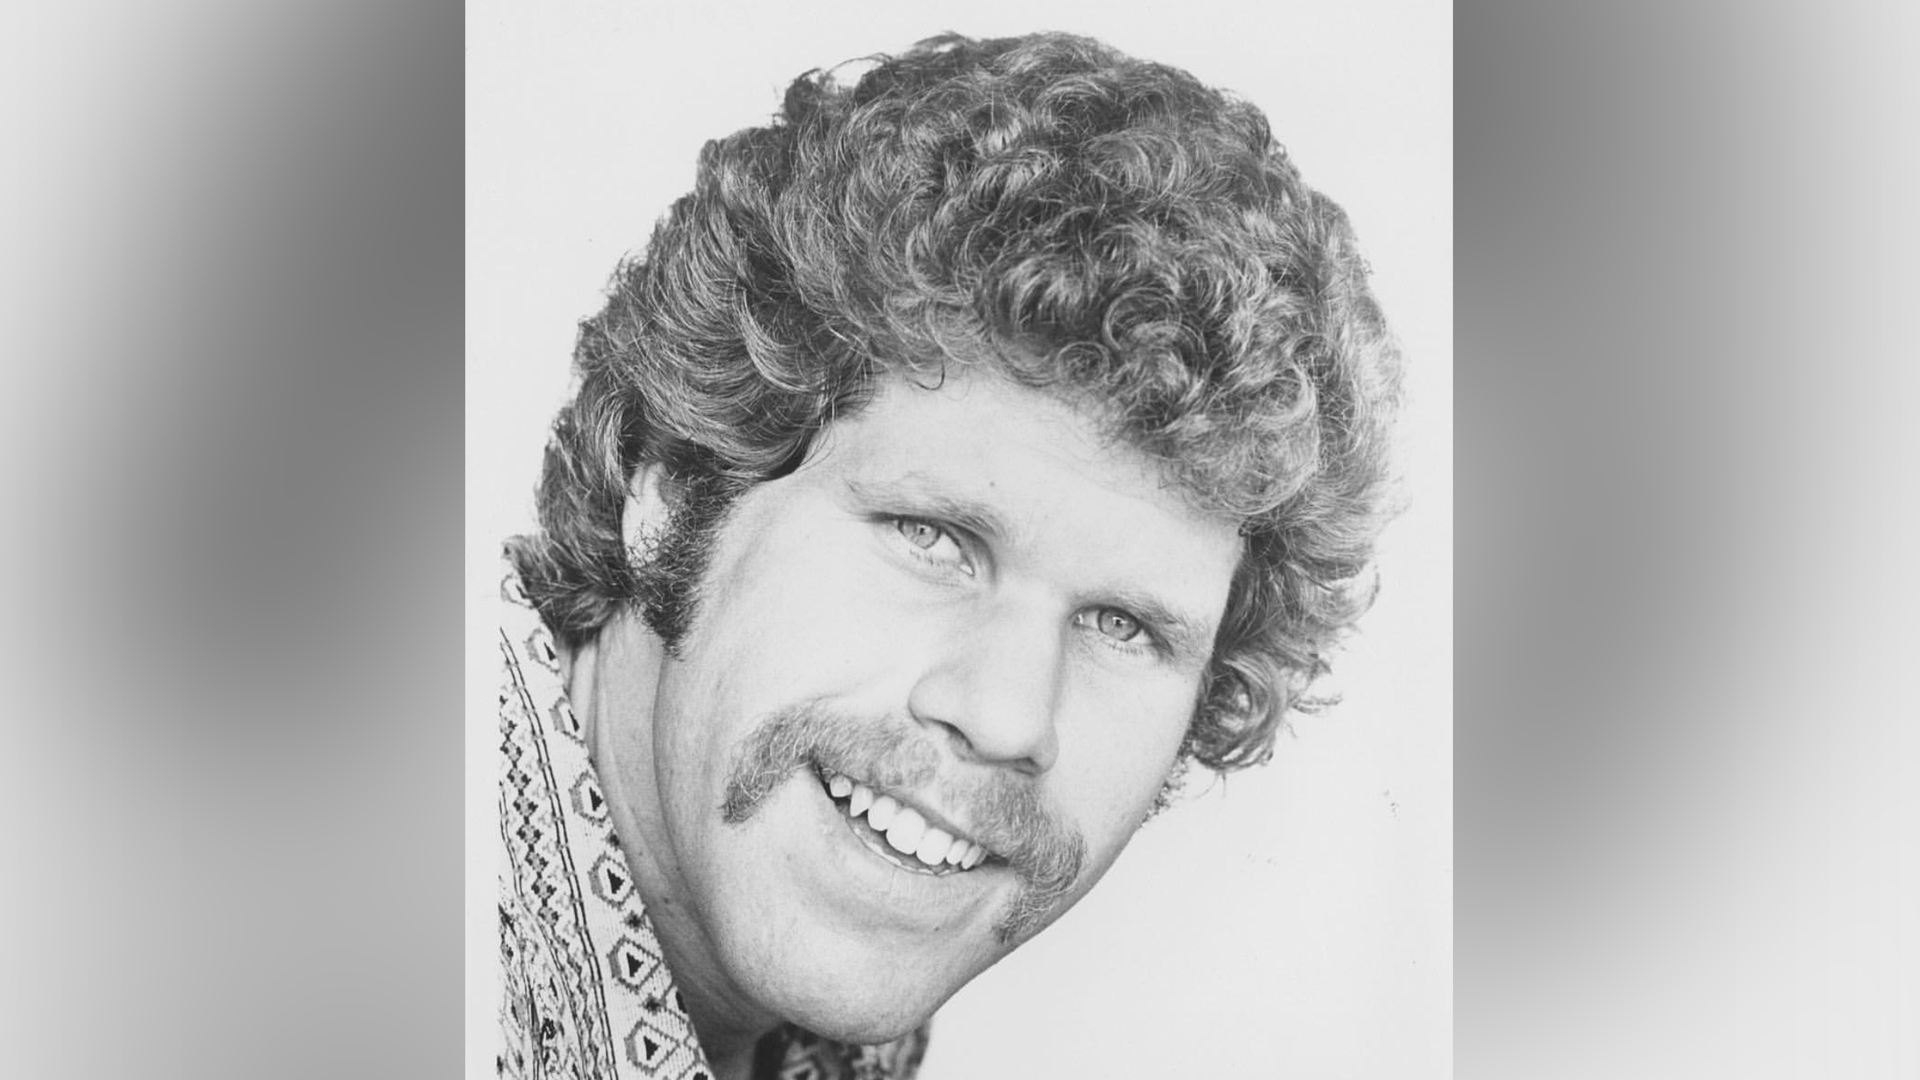 Young Ron Perlman